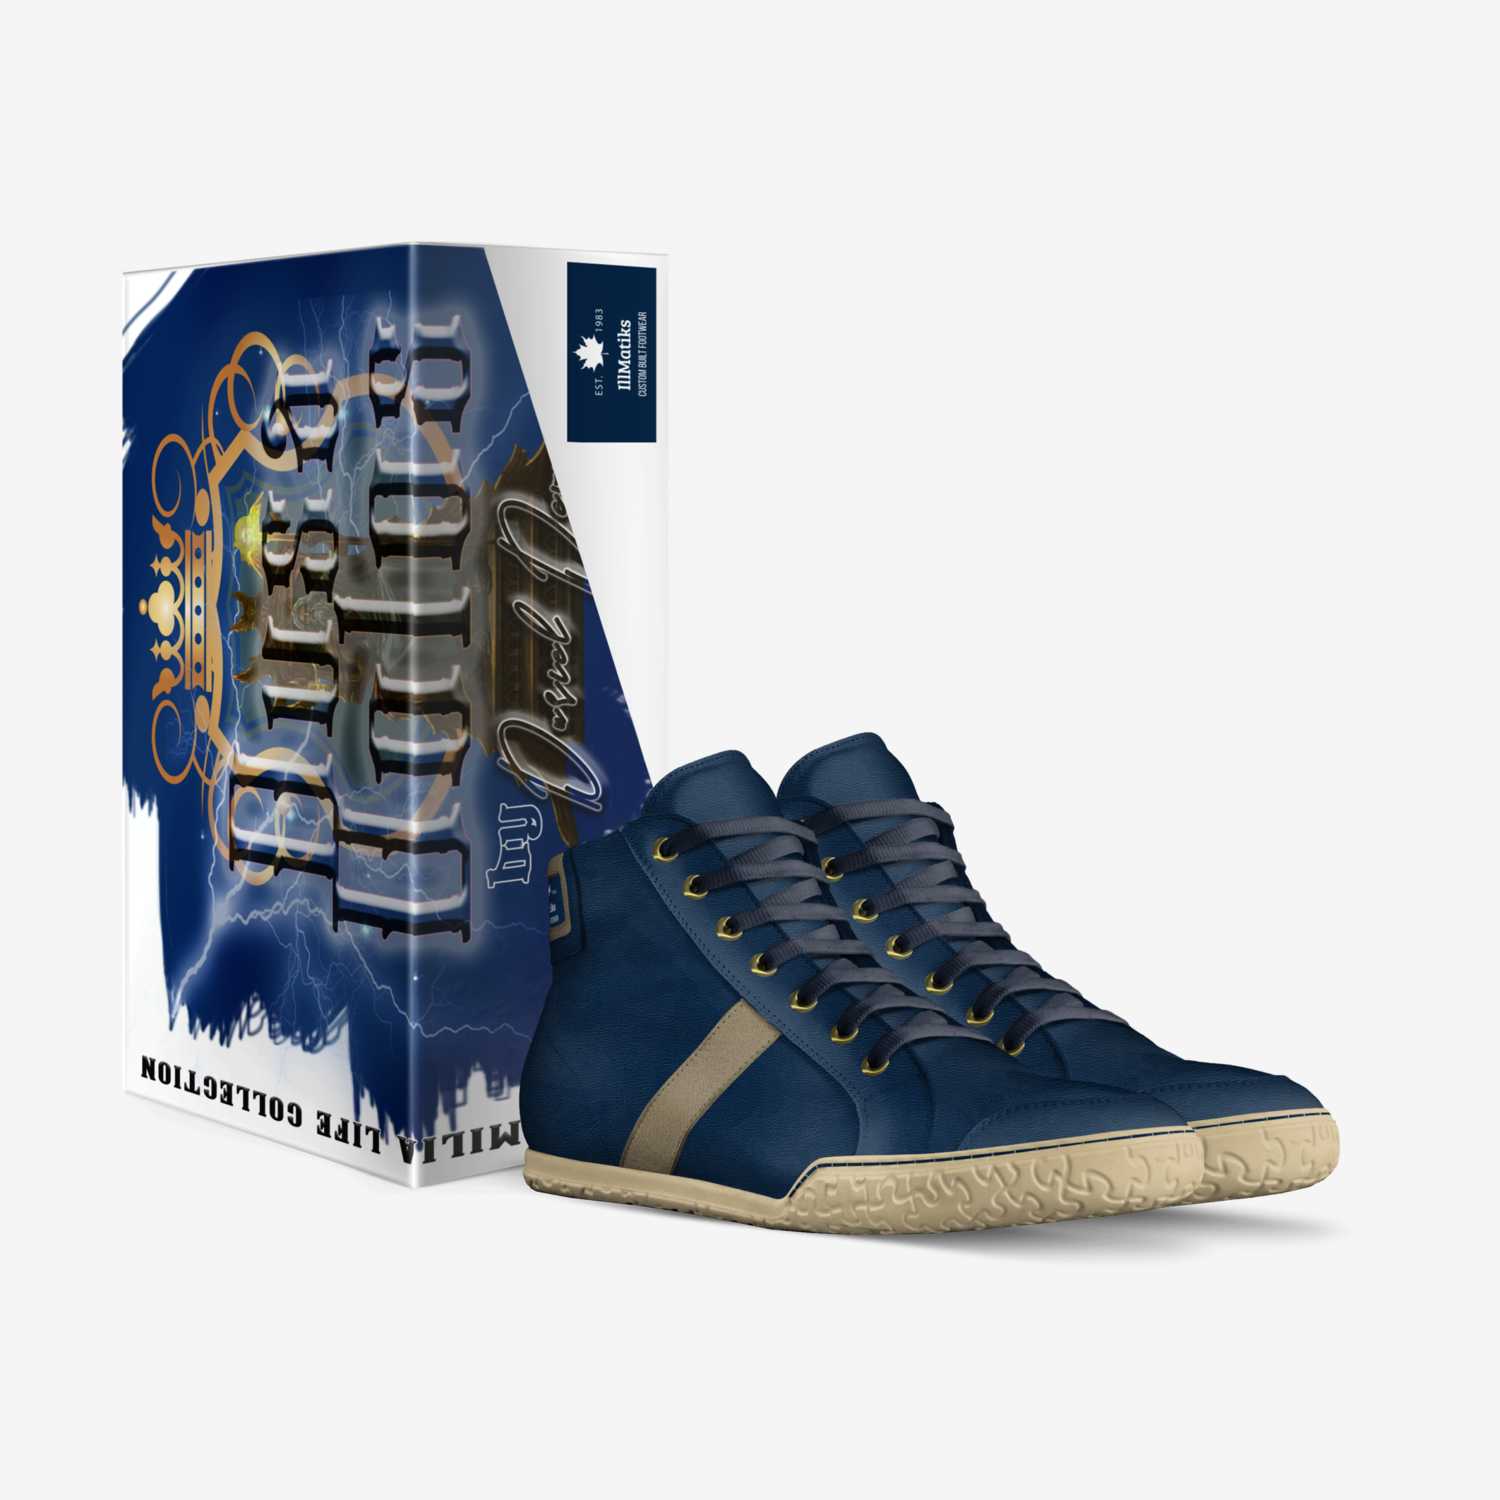 IllMatiks custom made in Italy shoes by Duriel Harris | Box view